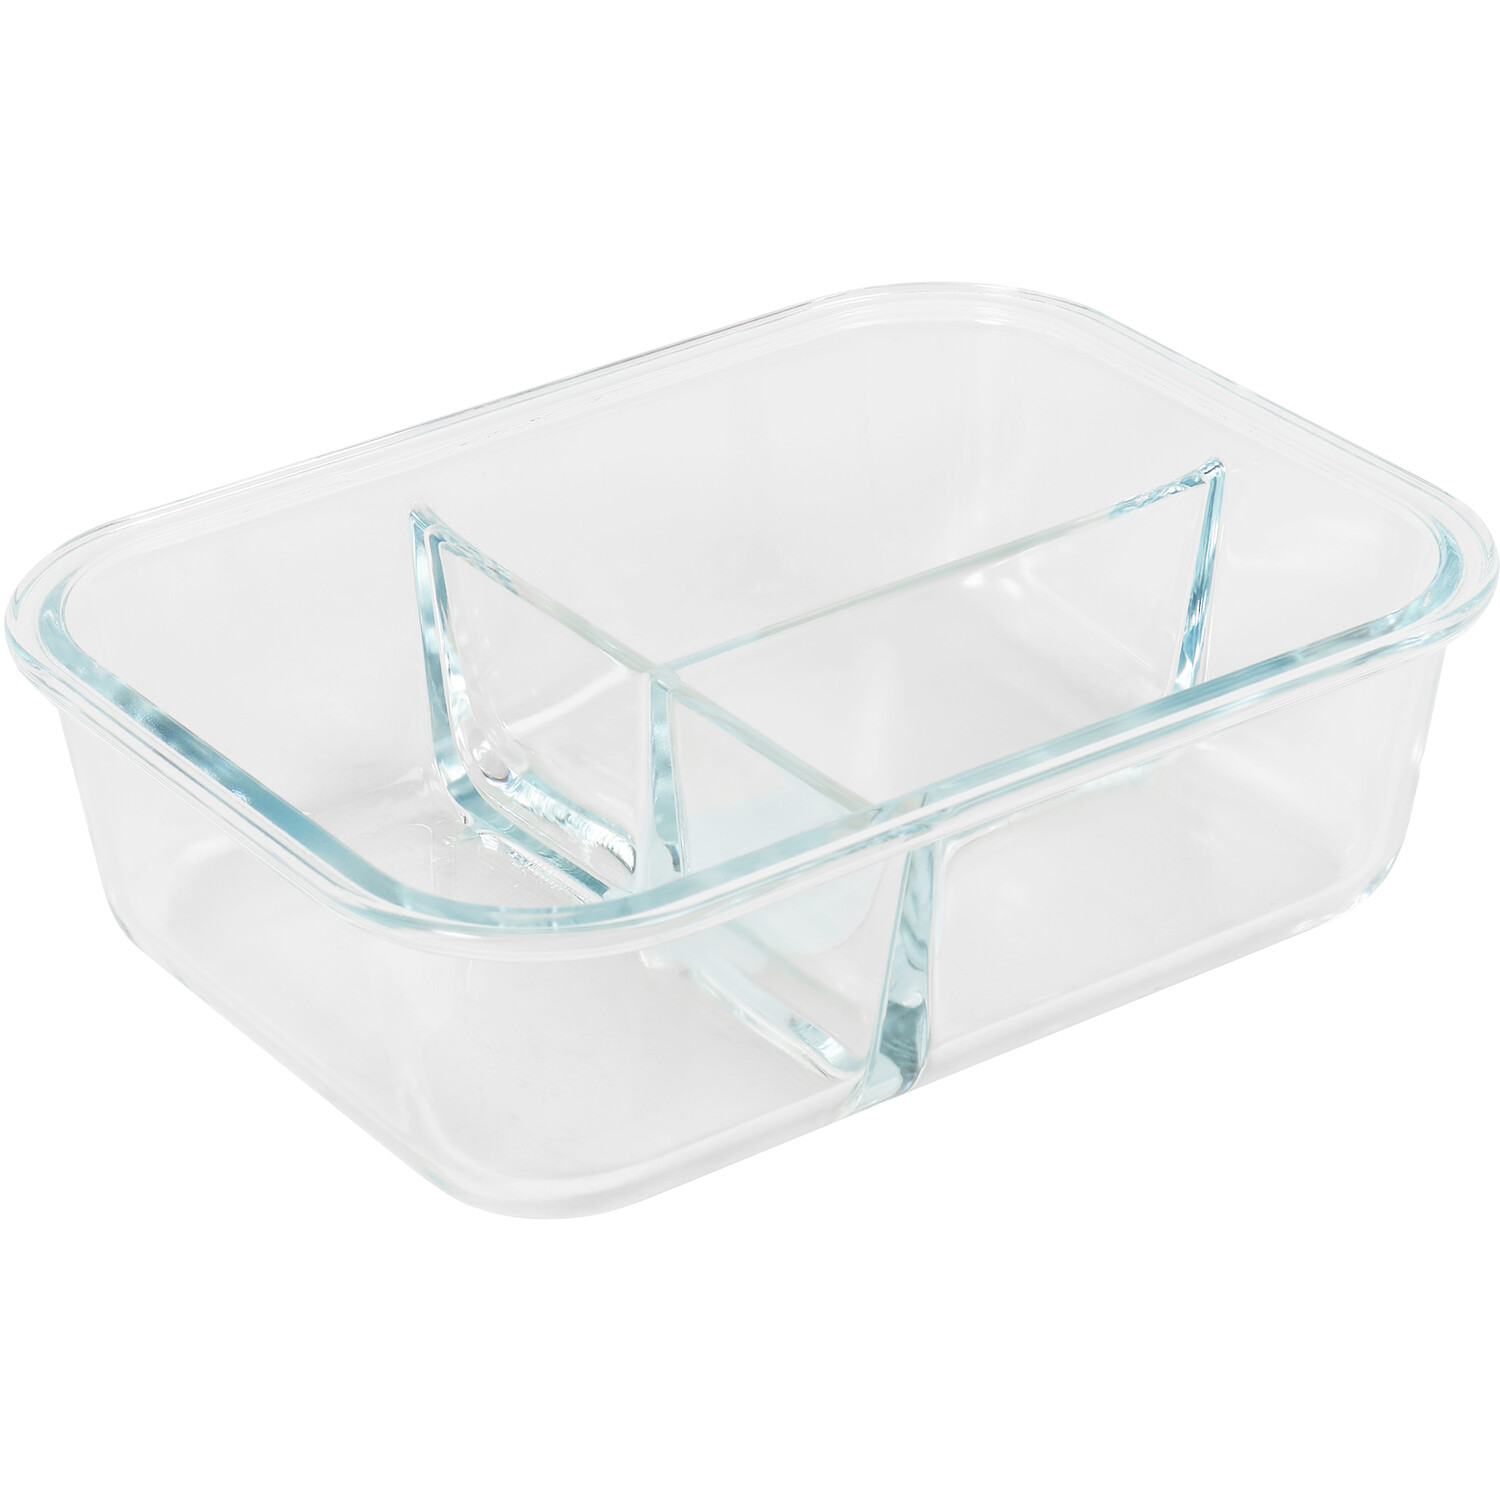 Borosilicate Glass Food Container - Clear Image 3